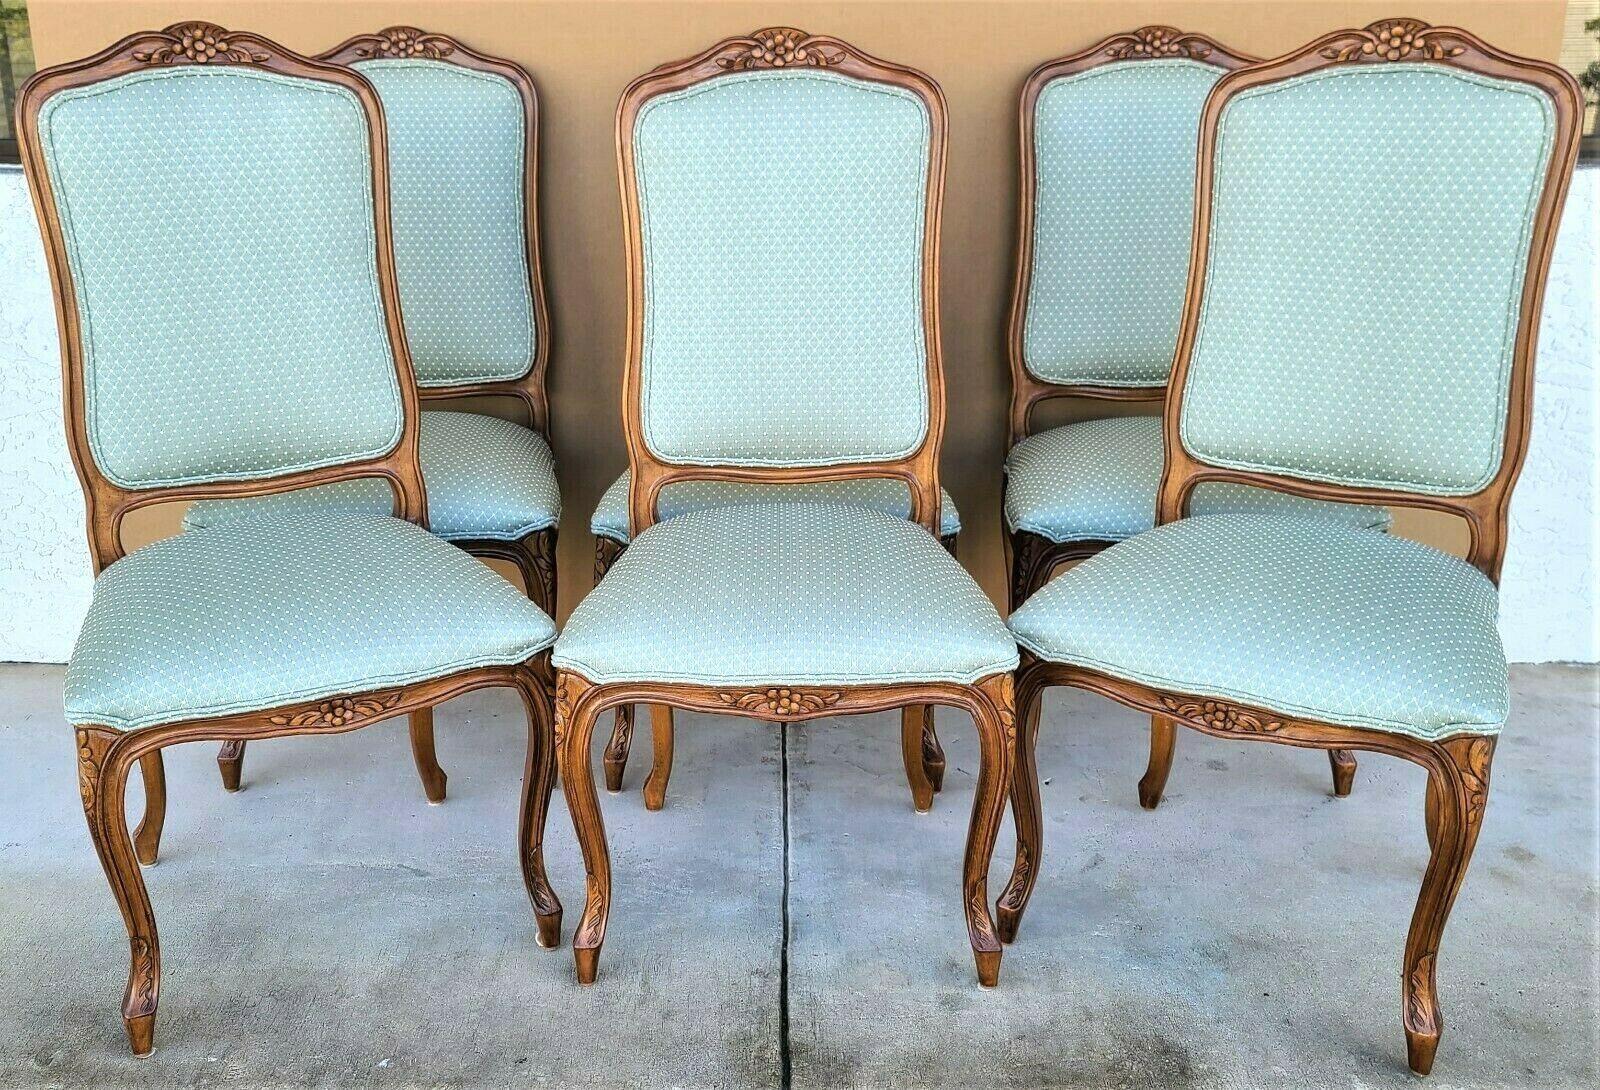 Offering One Of Our Recent Palm Beach Estate Fine Furniture Acquisitions Of A S
et of 6 Vintage French Provincial Louis XV Upholstered Dining Chairs
with floral carvings and spring-supported seats.

Approximate Measurements in Inches
43.5